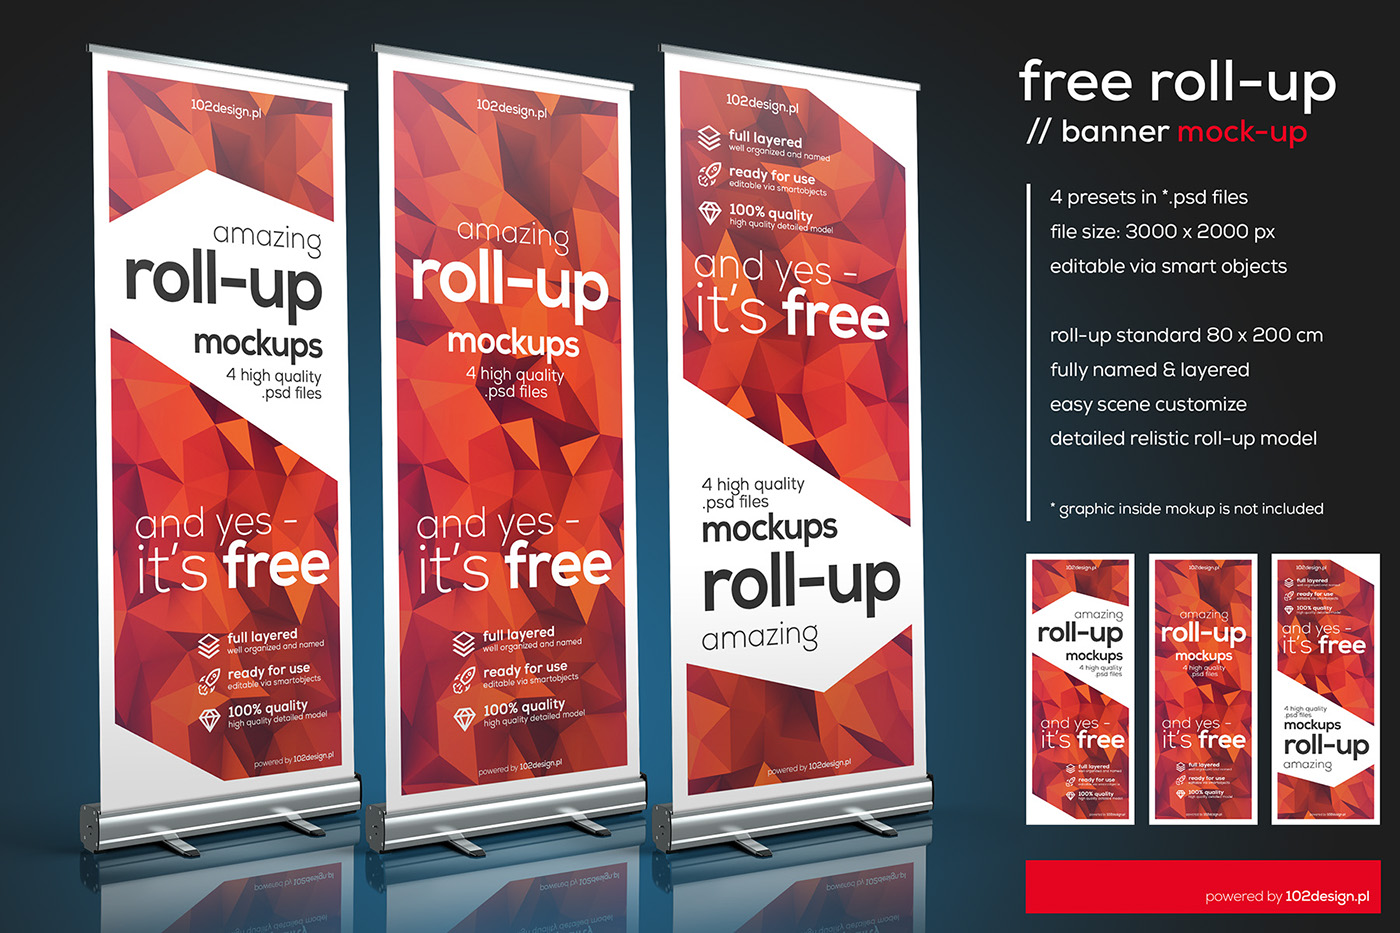 freebie free psd photoshop smart object Roll-Up rollup mock-up Mockup template 102design Relistic high quality 80x200 banner